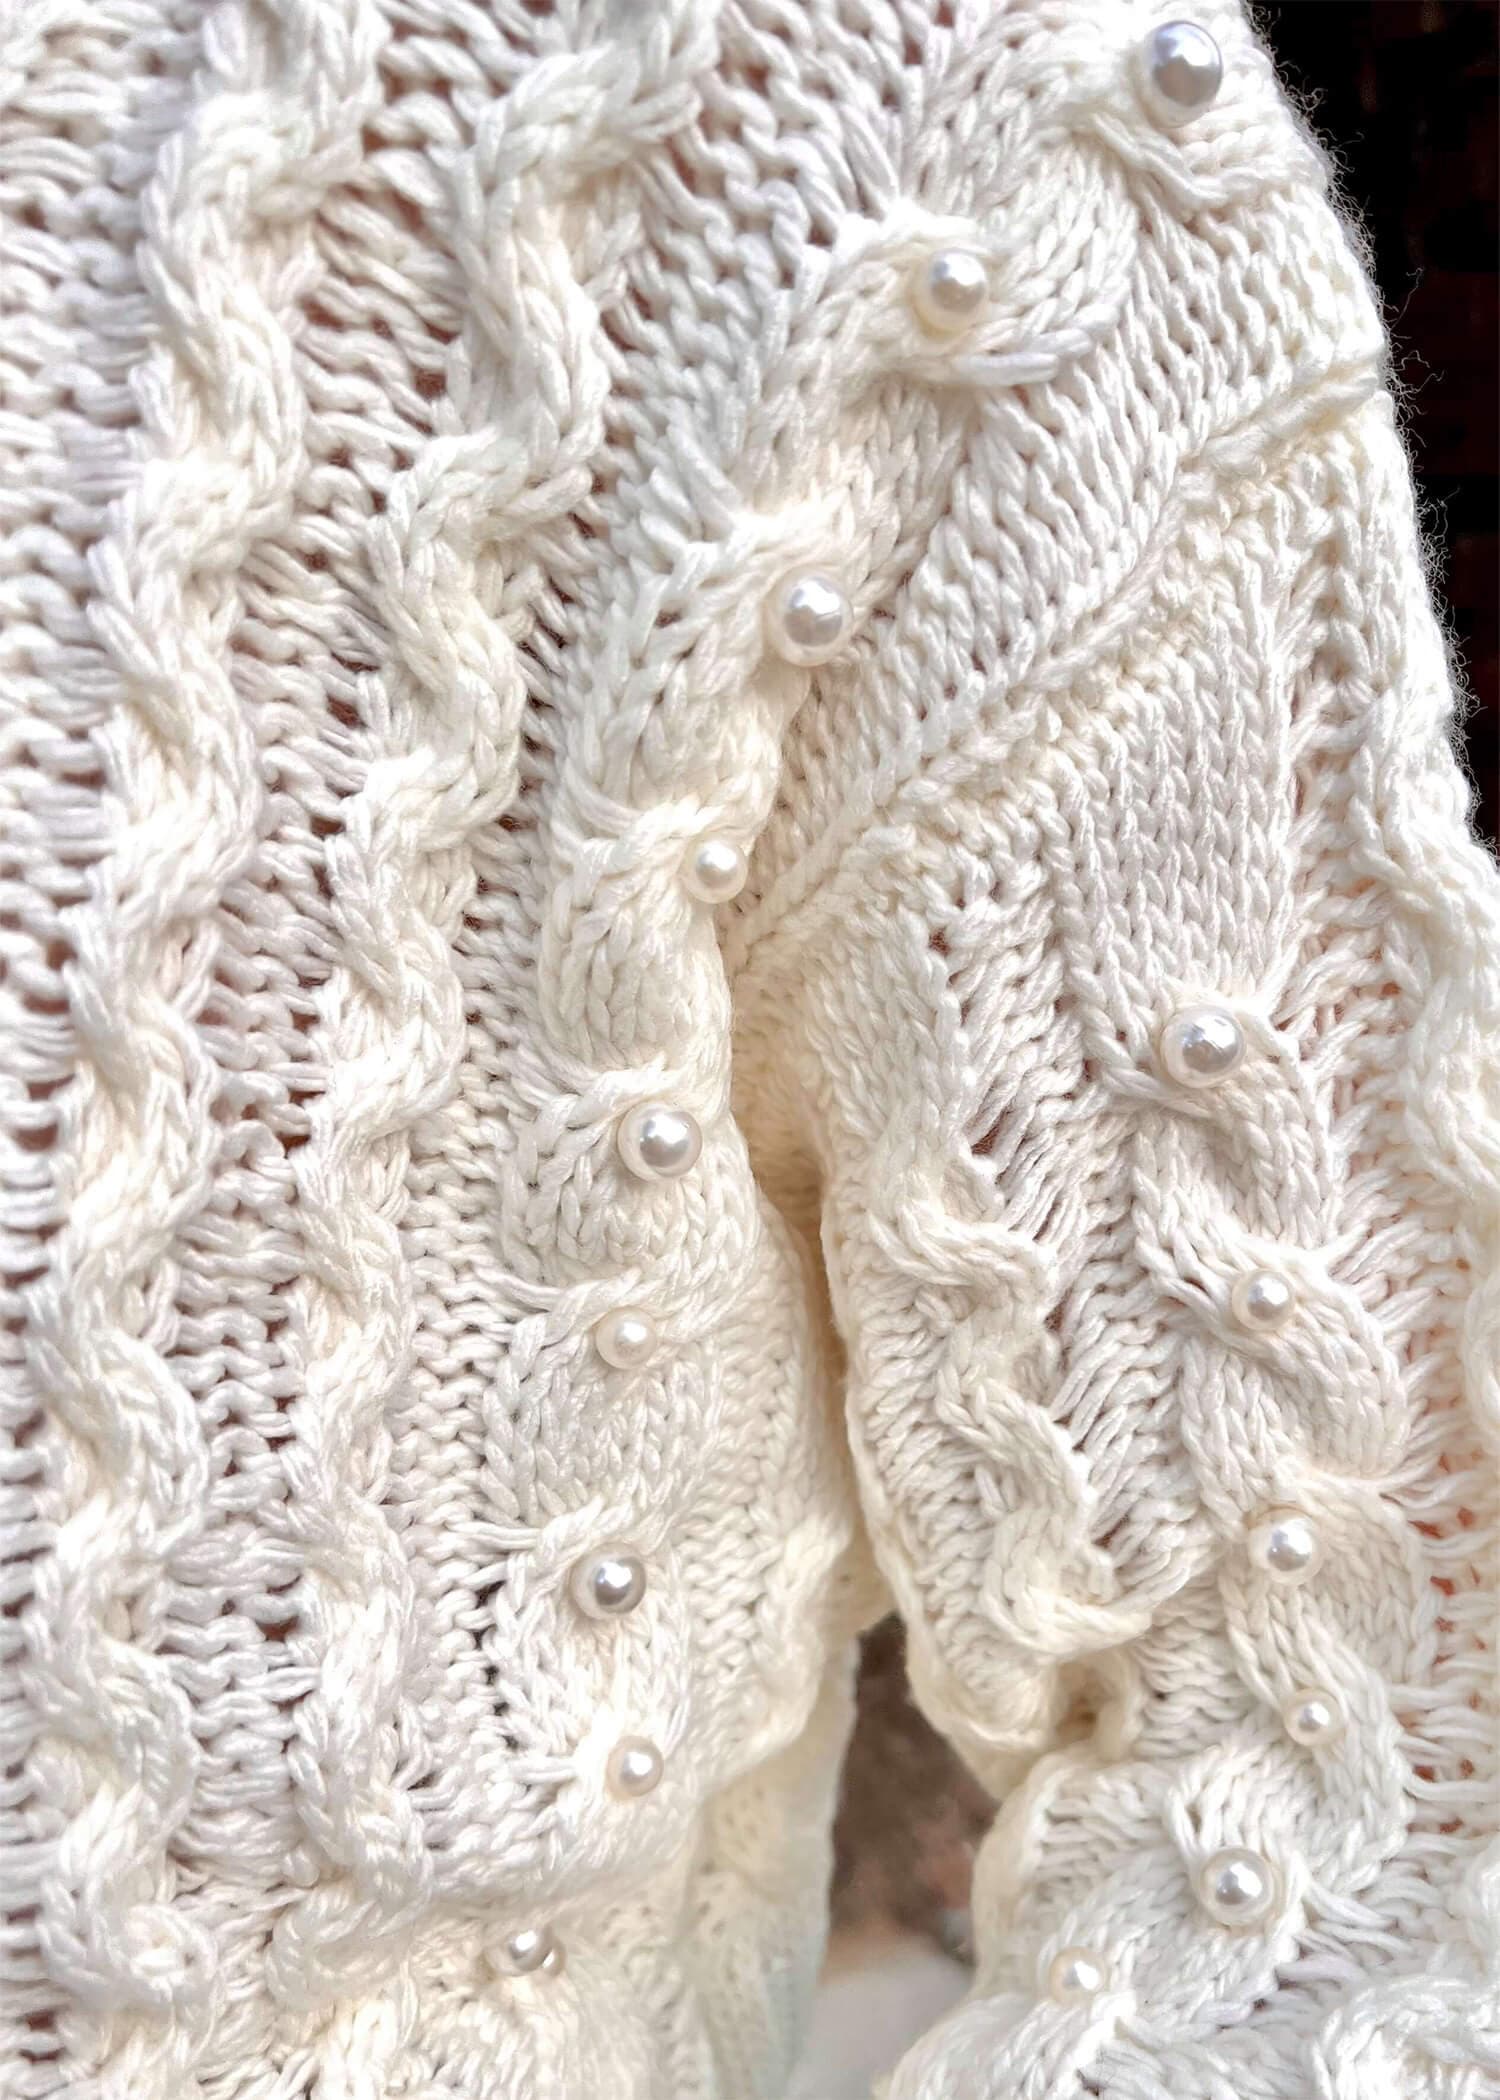 Keep It Going Sweater - Ivory Sweater MerciGrace Boutique.